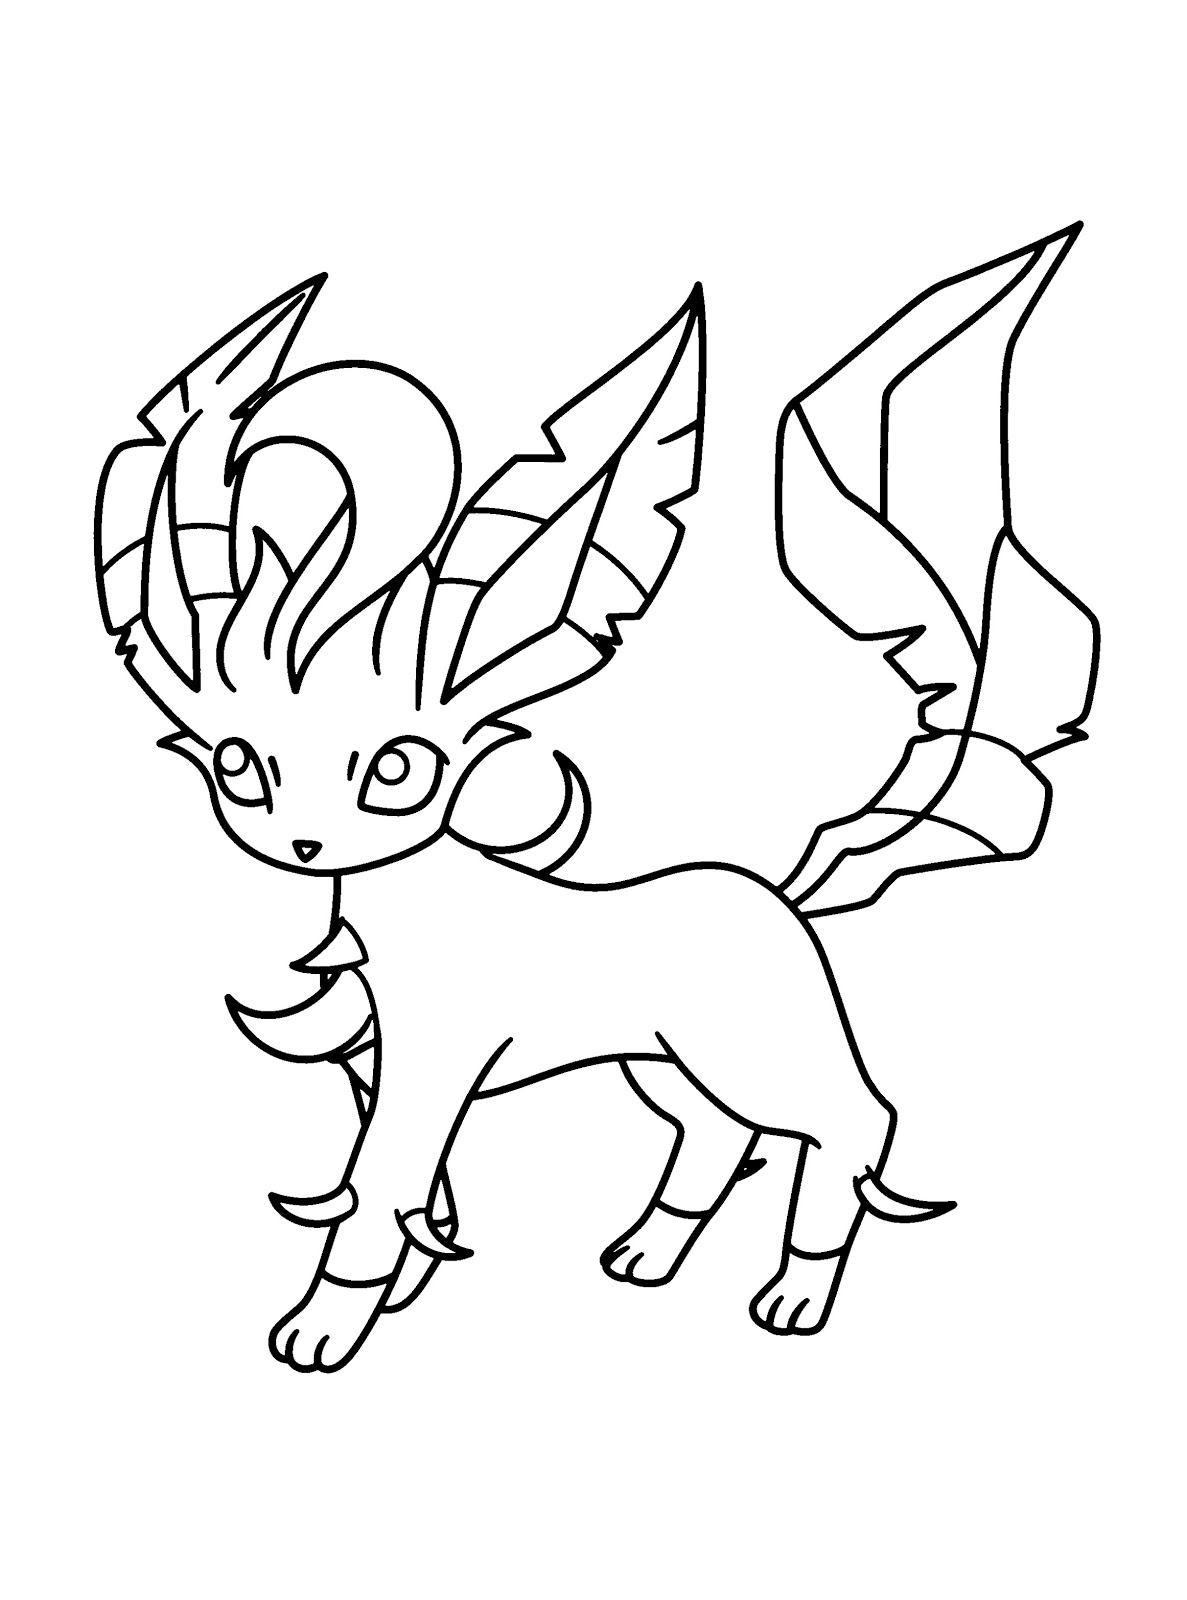 Pokemon Leafeon Coloring Pages - Free Pokemon Coloring Pages